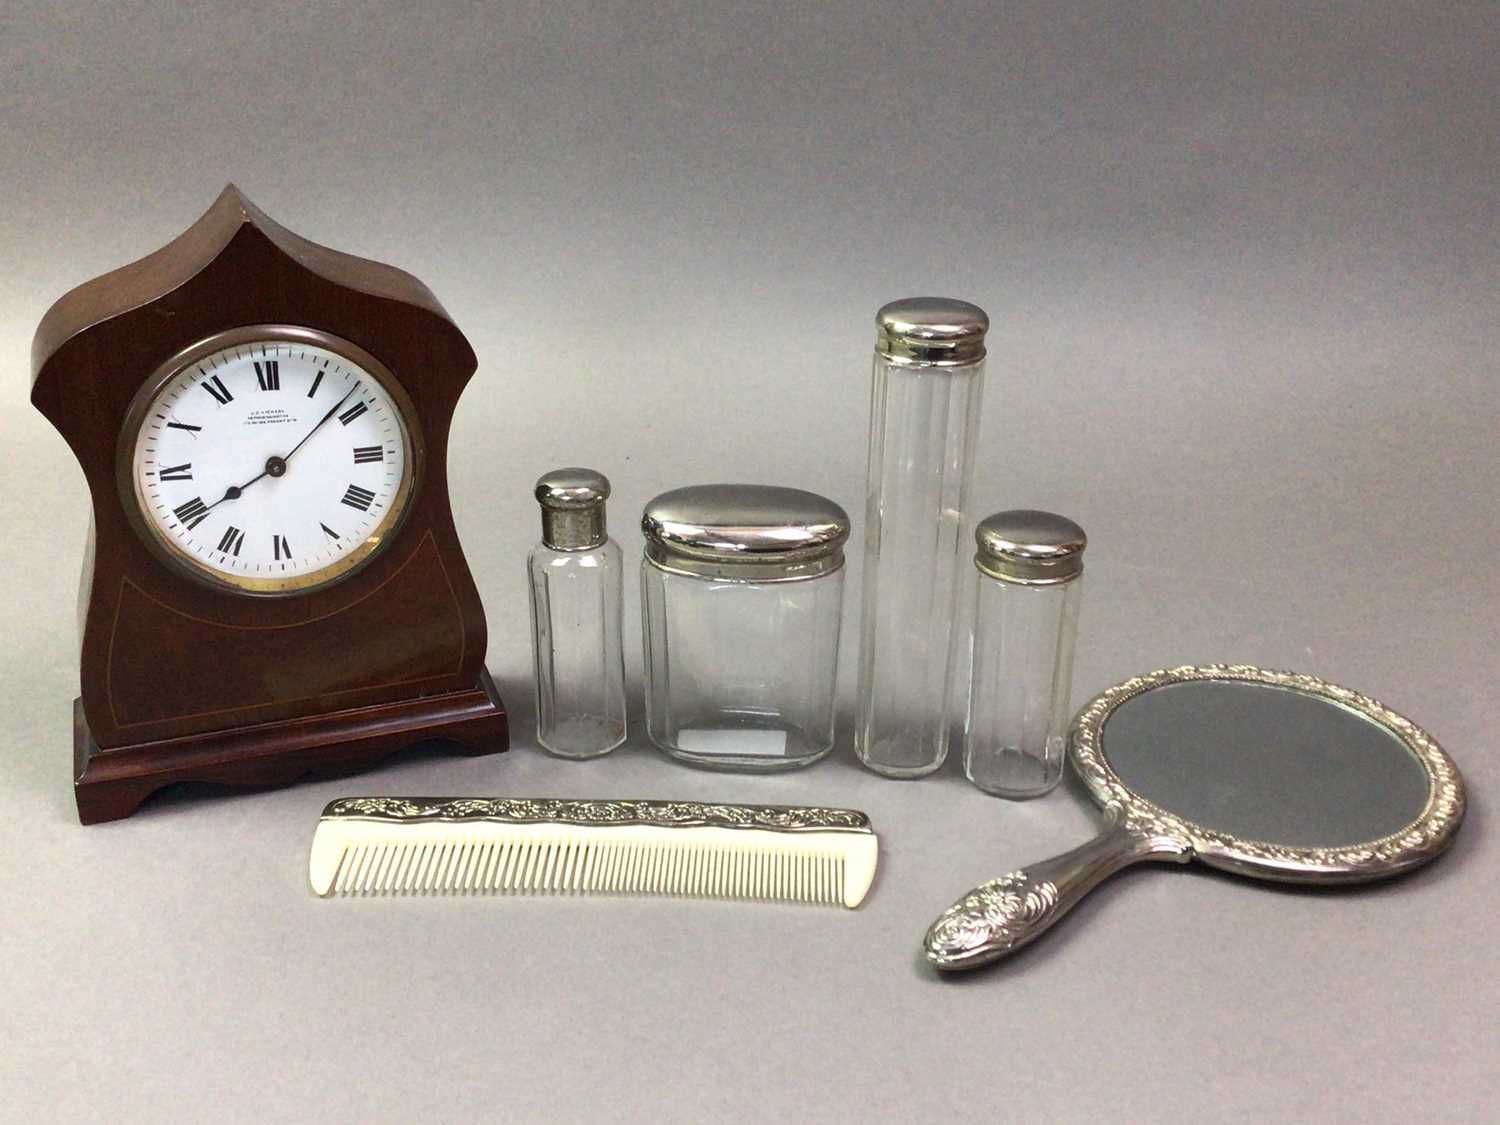 EDWARDIAN WALNUT MANTEL CLOCK AND A PLATED DRESSING TABLE SET - Image 2 of 2